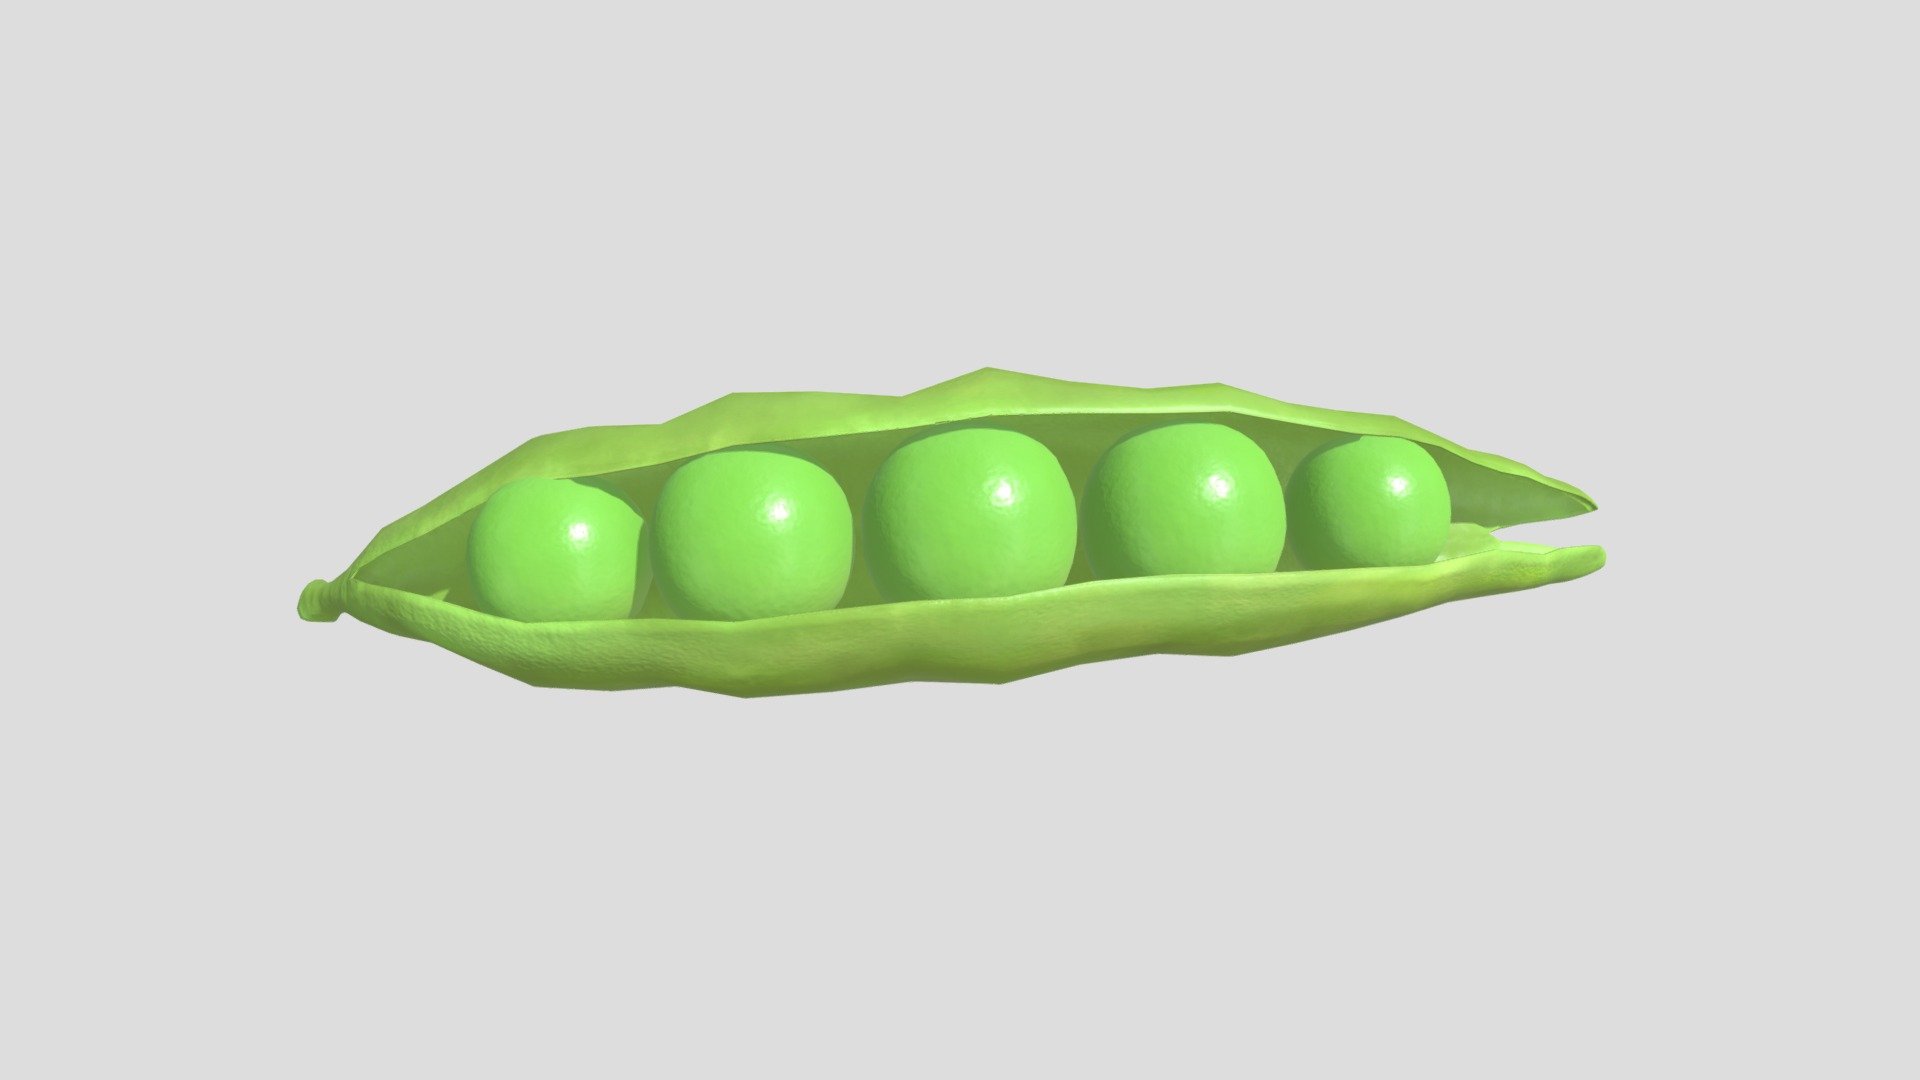 3d model of a Pea. Perfect for games, scenes or renders.

Model is correctly divided into main parts. All main parts are presented as separate parts therefore materials of objects are easy to be modified or removed and standard parts are easy to be replaced.

TEXTURES: Models includes high textures with maps: Base Color (.png) Height (.png) Metallic (.png) Normal (.png) Roughness (.png)

FORMATS: .obj .dae .stl .blend .fbx .3ds

GENERAL: Easy editable. Model is fully textured.

Vertices:3.3k Polygons: 3.3k

All formats have been tested and work correctly.

Some files may need textures or materials adjusted or added depending on the program they are imported into 3d model